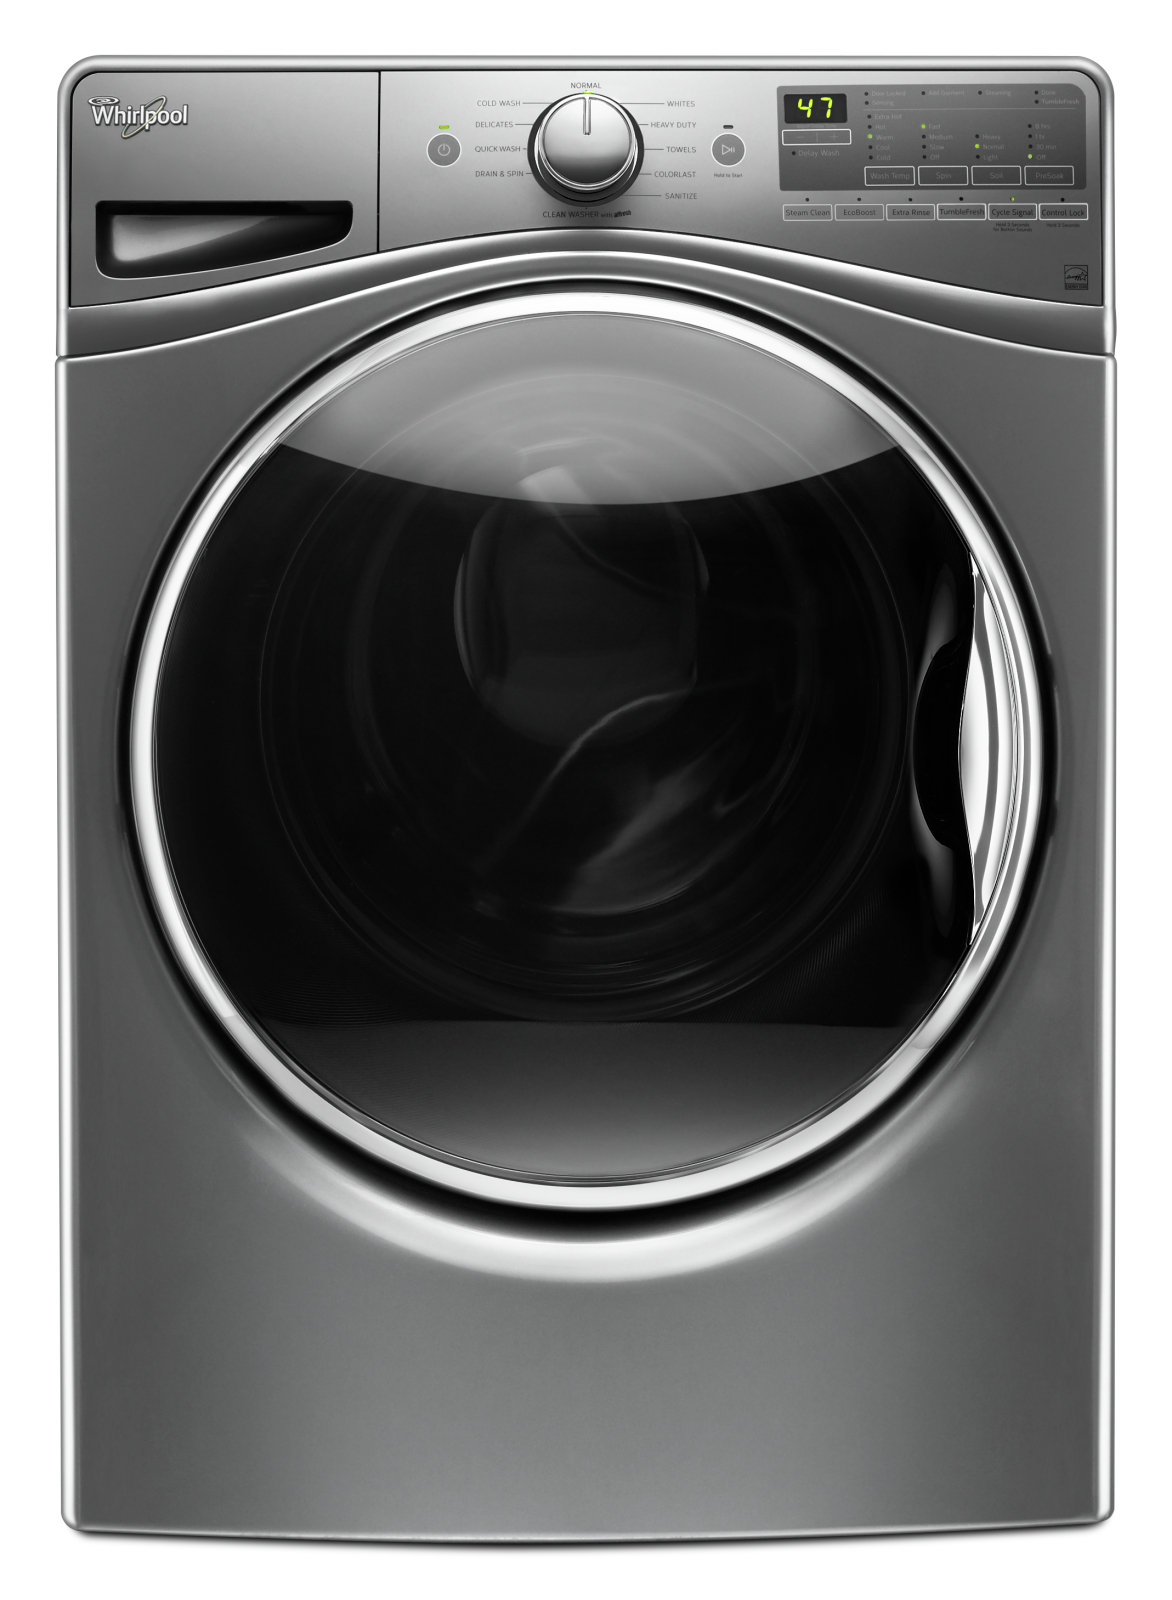 Whirlpool - 4.5 cu. Ft  Front Load Washer in Silver - WFW85HEFC